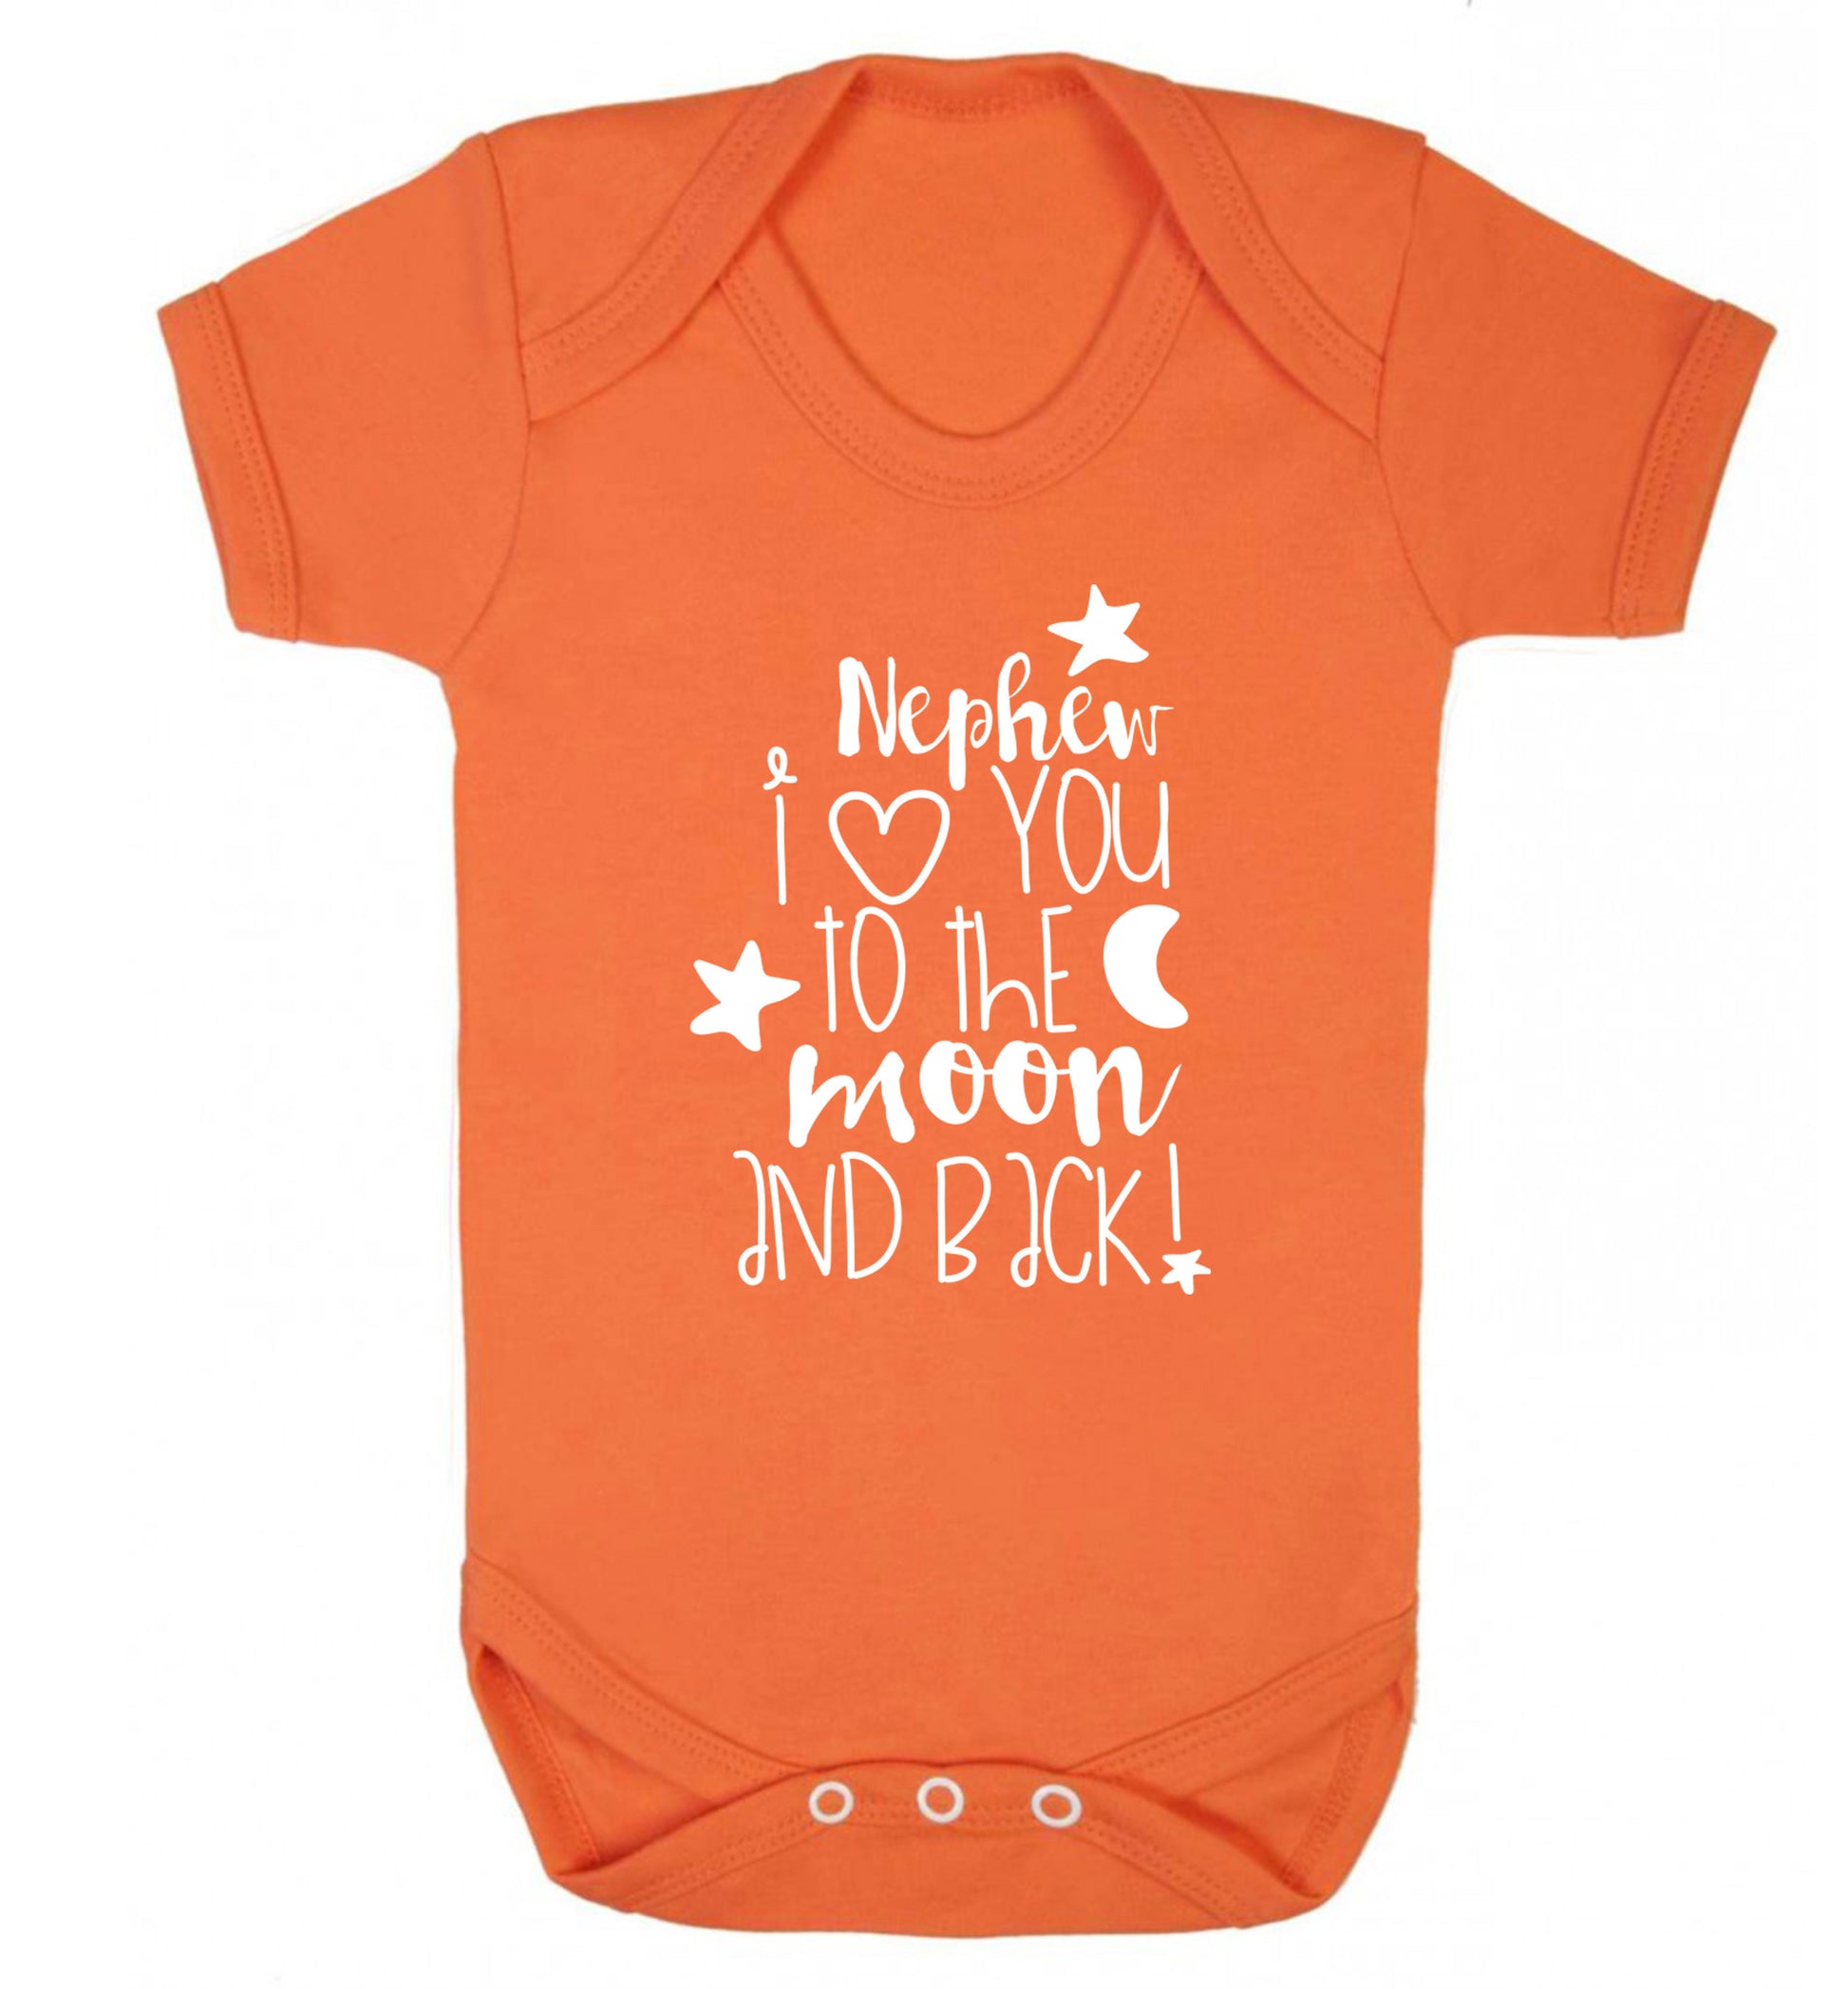 Nephew I love you to the moon and back Baby Vest orange 18-24 months